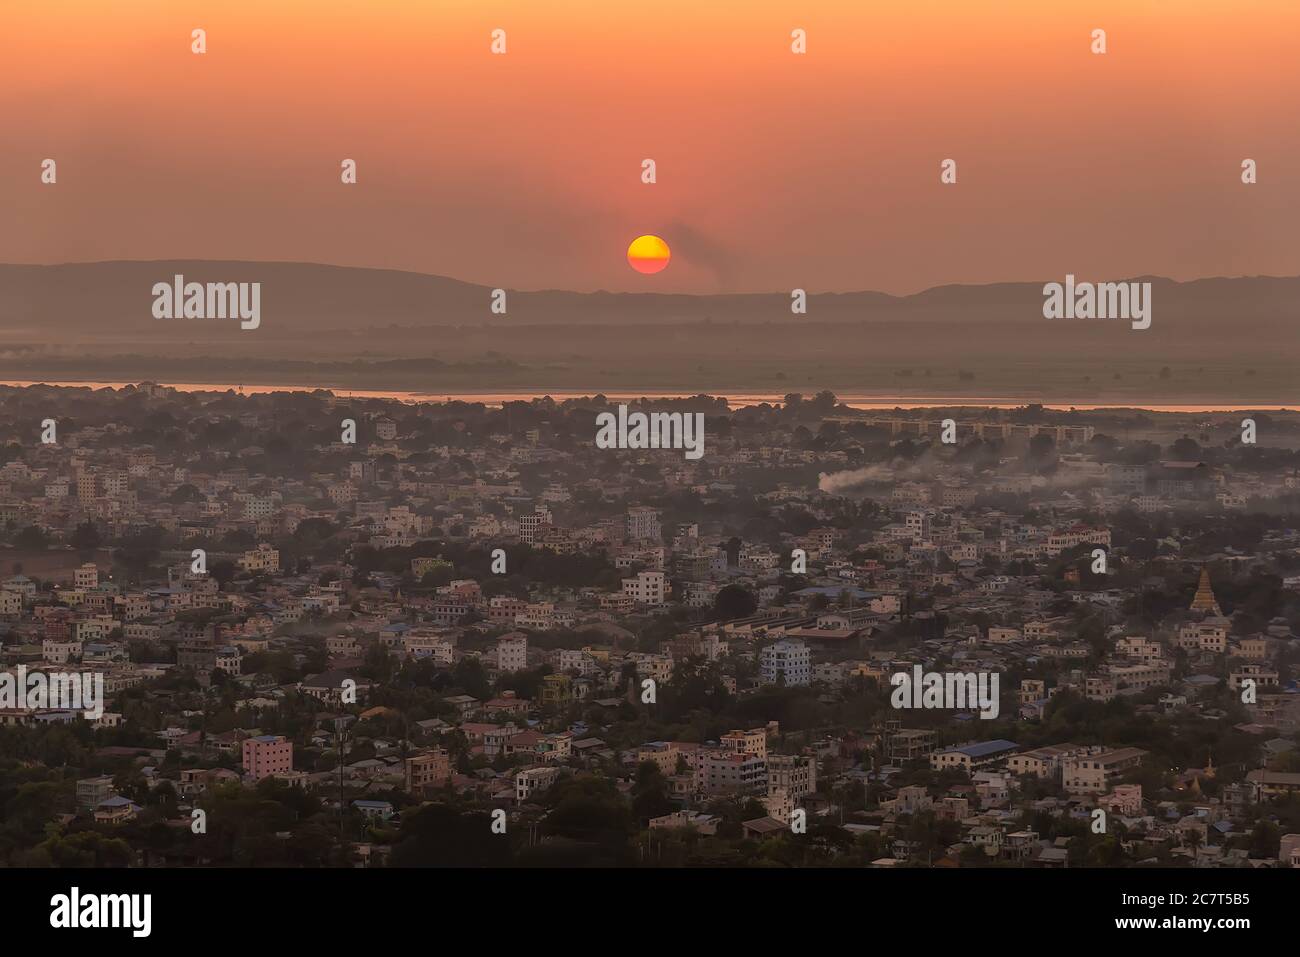 Sunset over Irrawaddy river and Mandalay city, Myanmar. Mandalay is the second-largest city in Myanmar, after Yangon Stock Photo